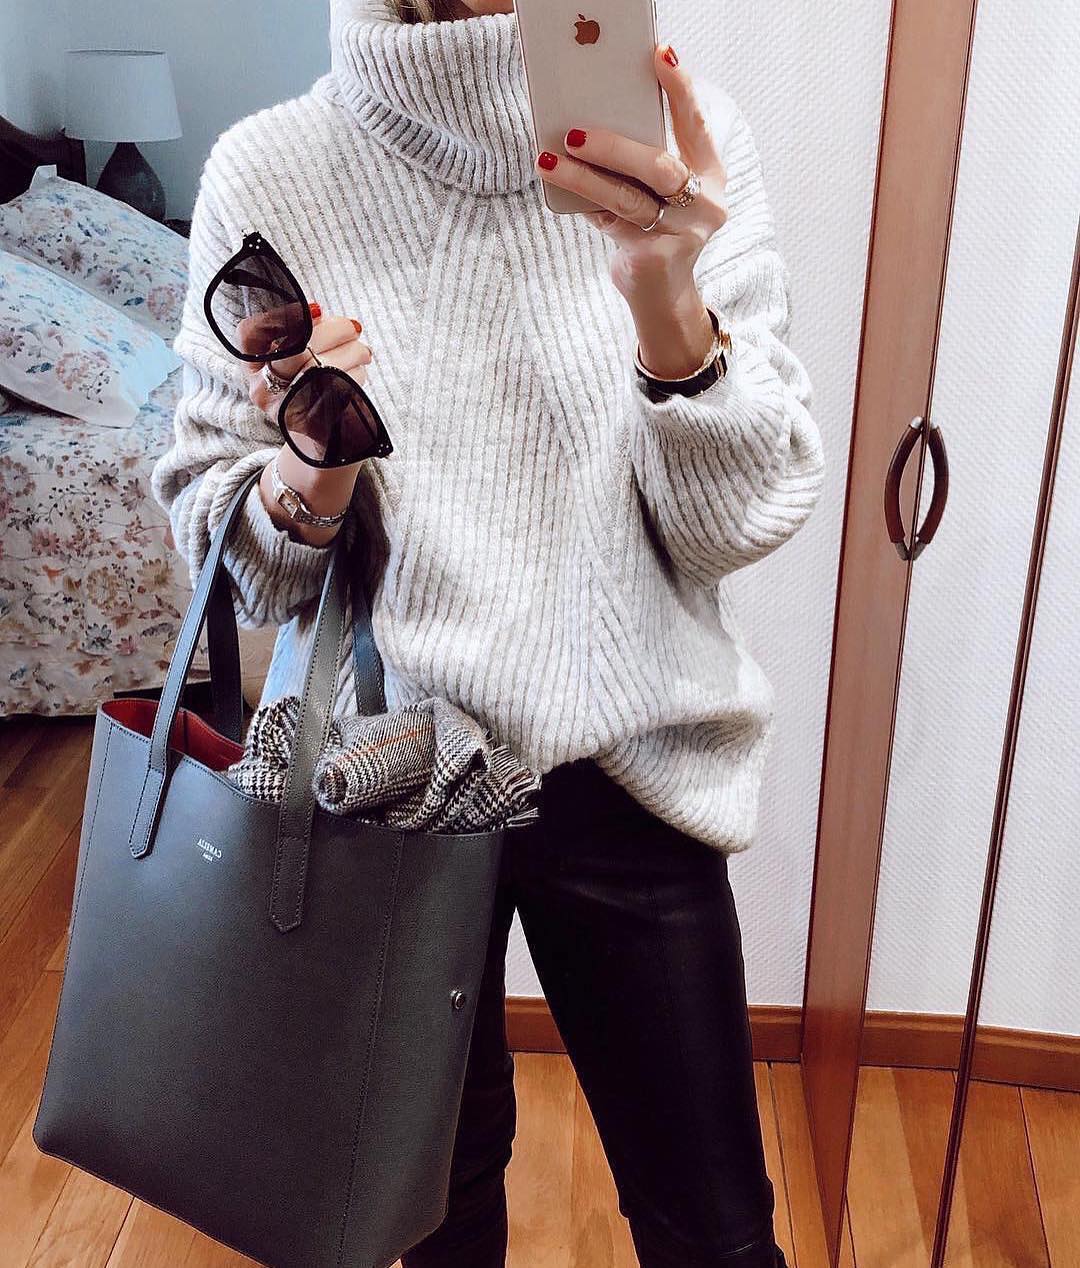 Ribbed Knit Sweater In White And Black
Leather Pants For Fall